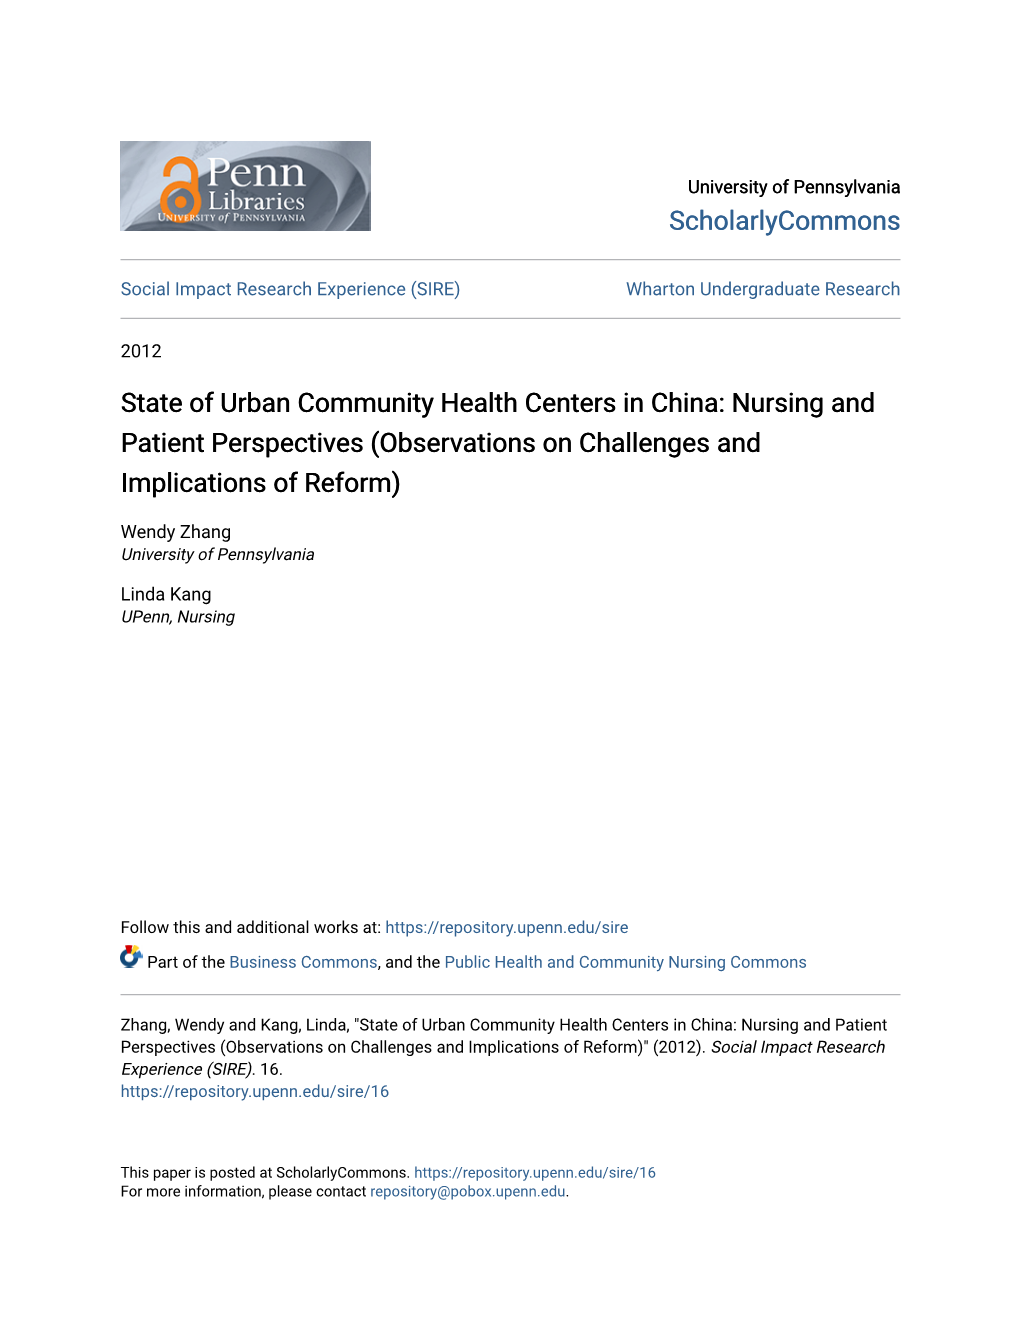 State of Urban Community Health Centers in China: Nursing and Patient Perspectives (Observations on Challenges and Implications of Reform)